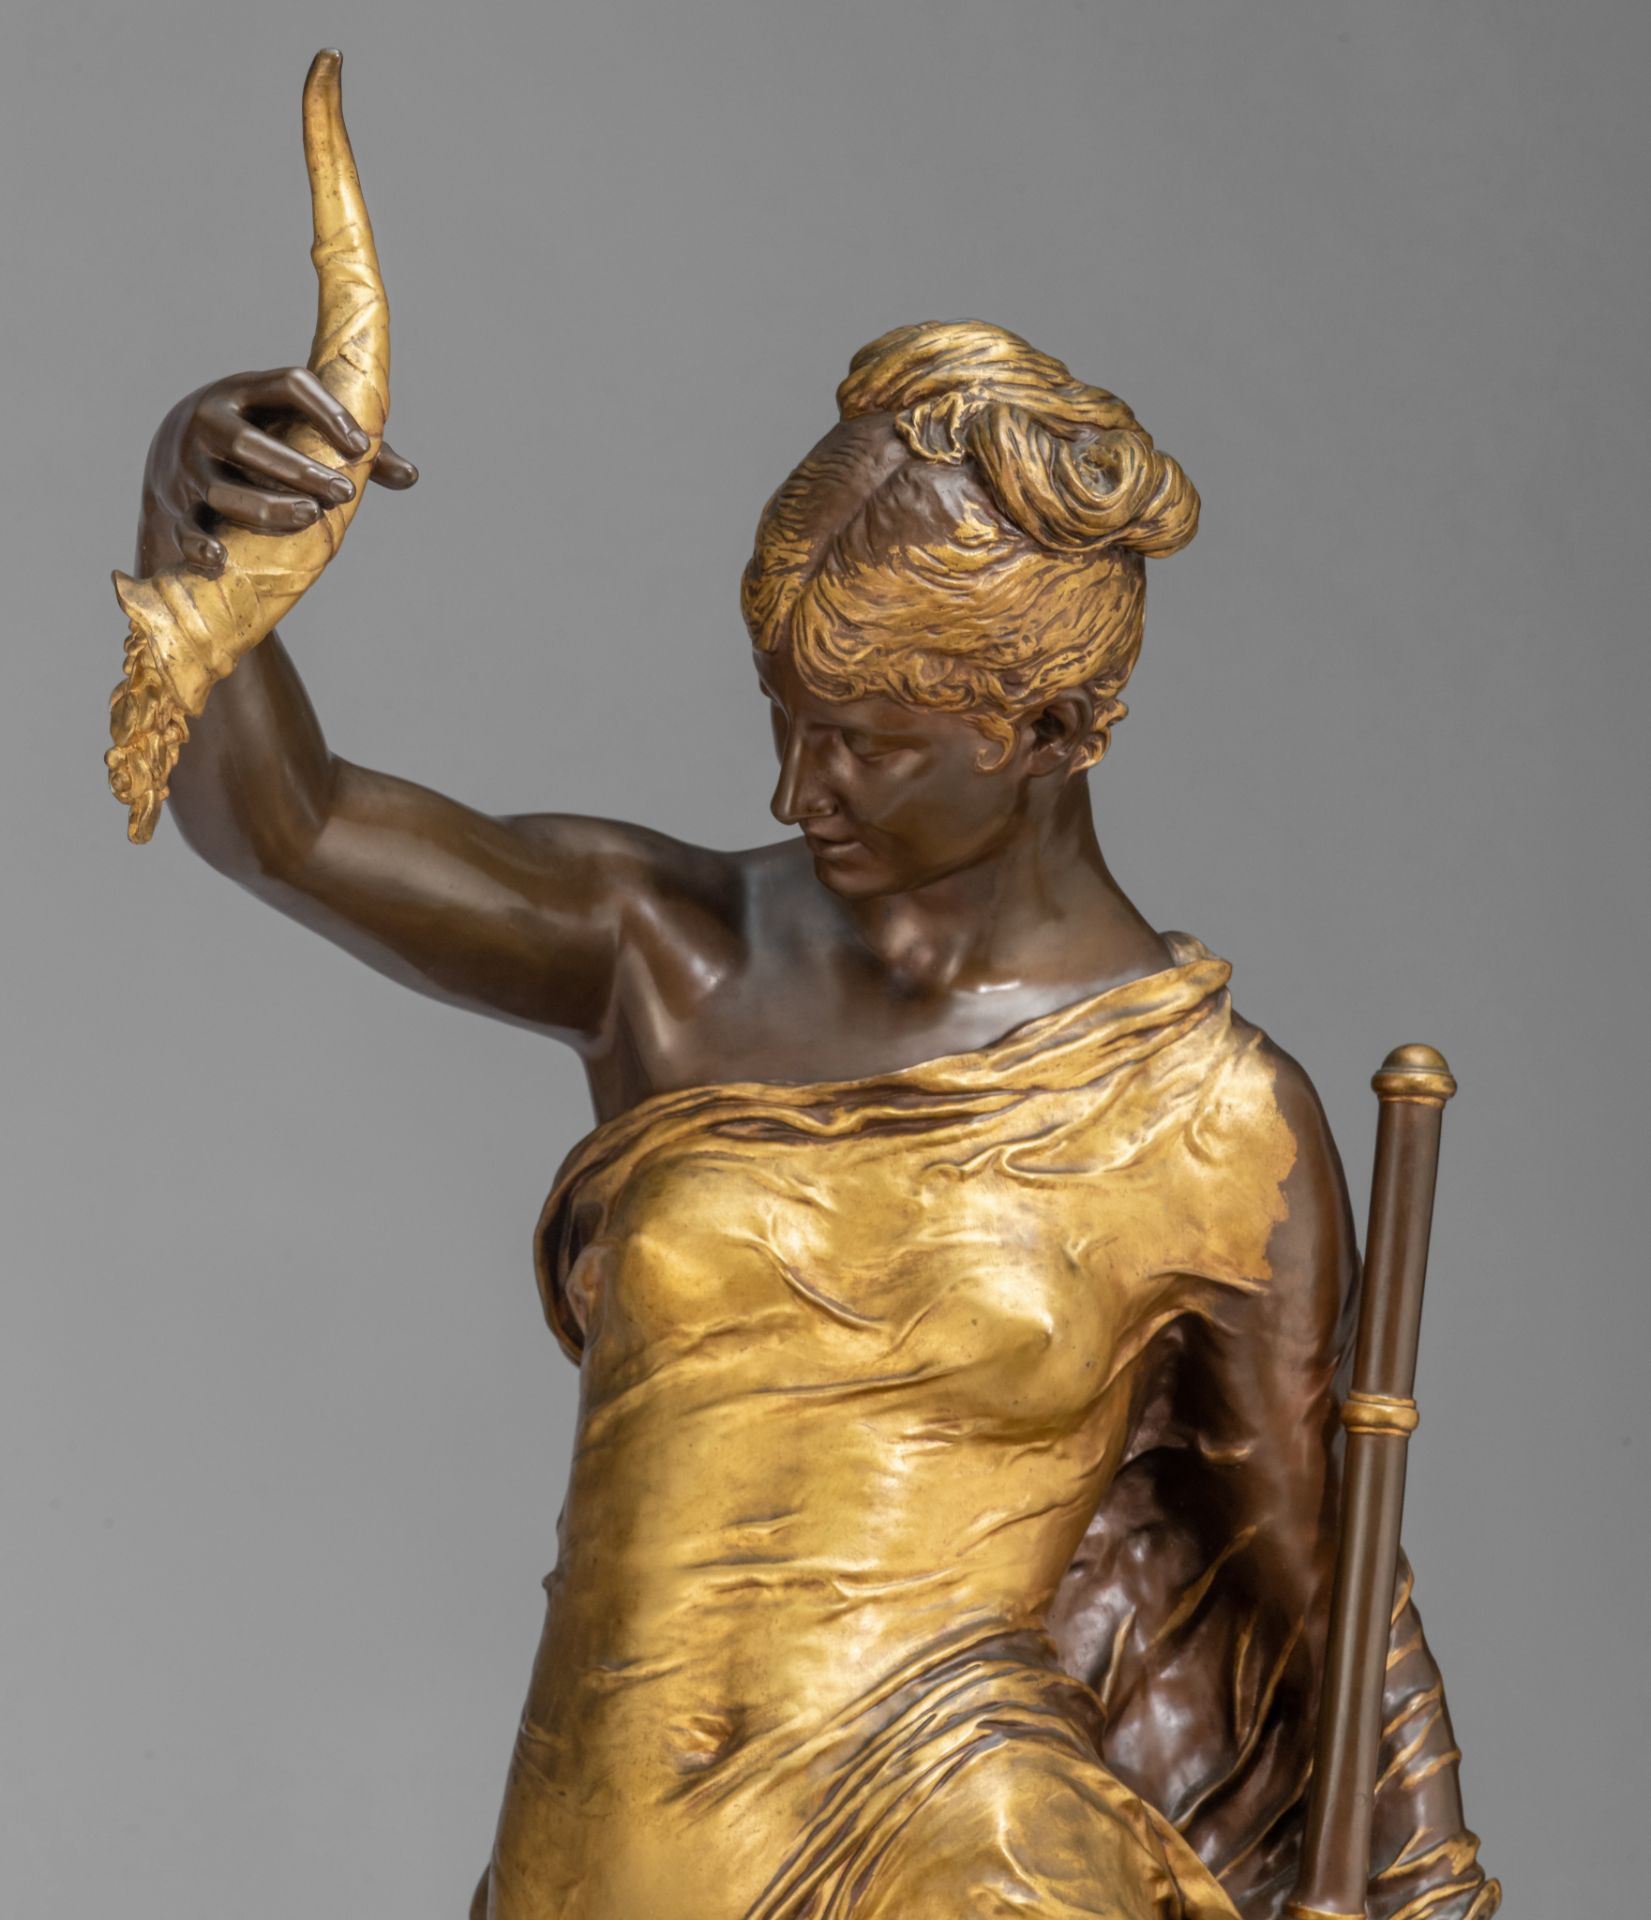 Paul Moreau-Vauthier (1871-1936), 'Fortuna', 1878, gilt and patinated bronze on a matching pedestal, - Image 12 of 14